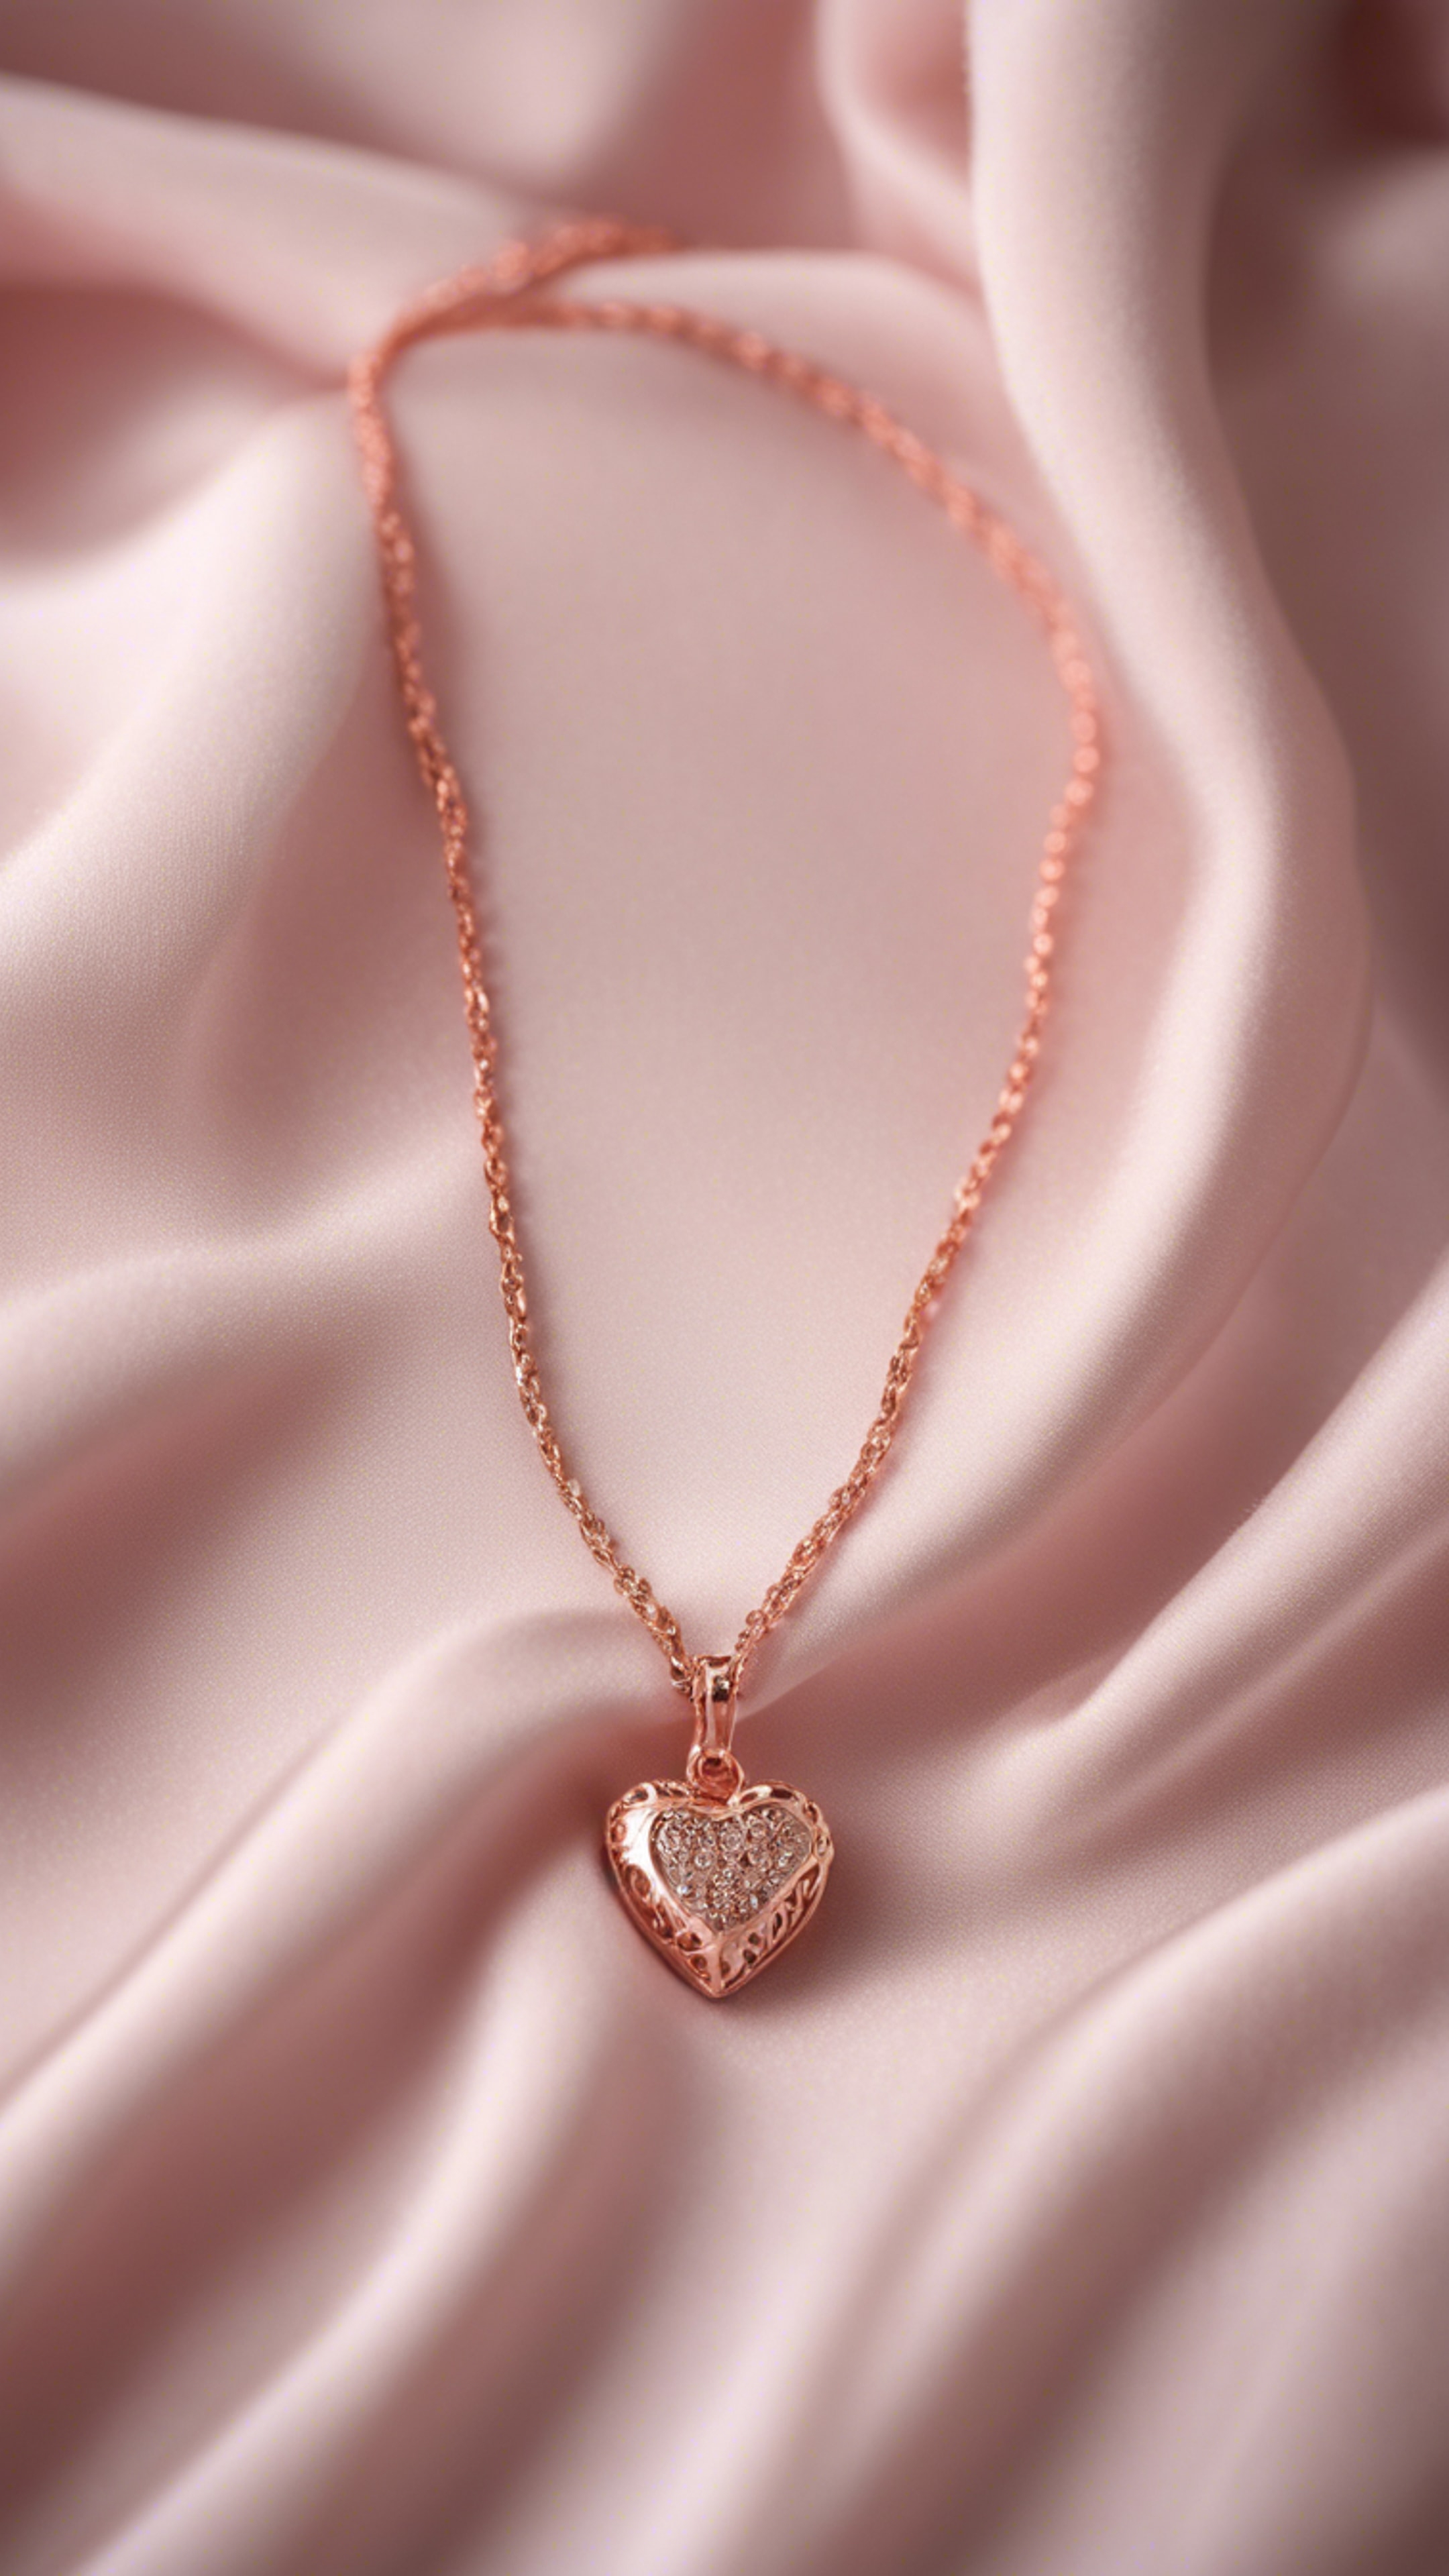 A delicate rose gold chain necklace with a small heart pendant, displayed on a soft pink satin fabric. Ταπετσαρία[1bffd5f9a0f0499fae91]